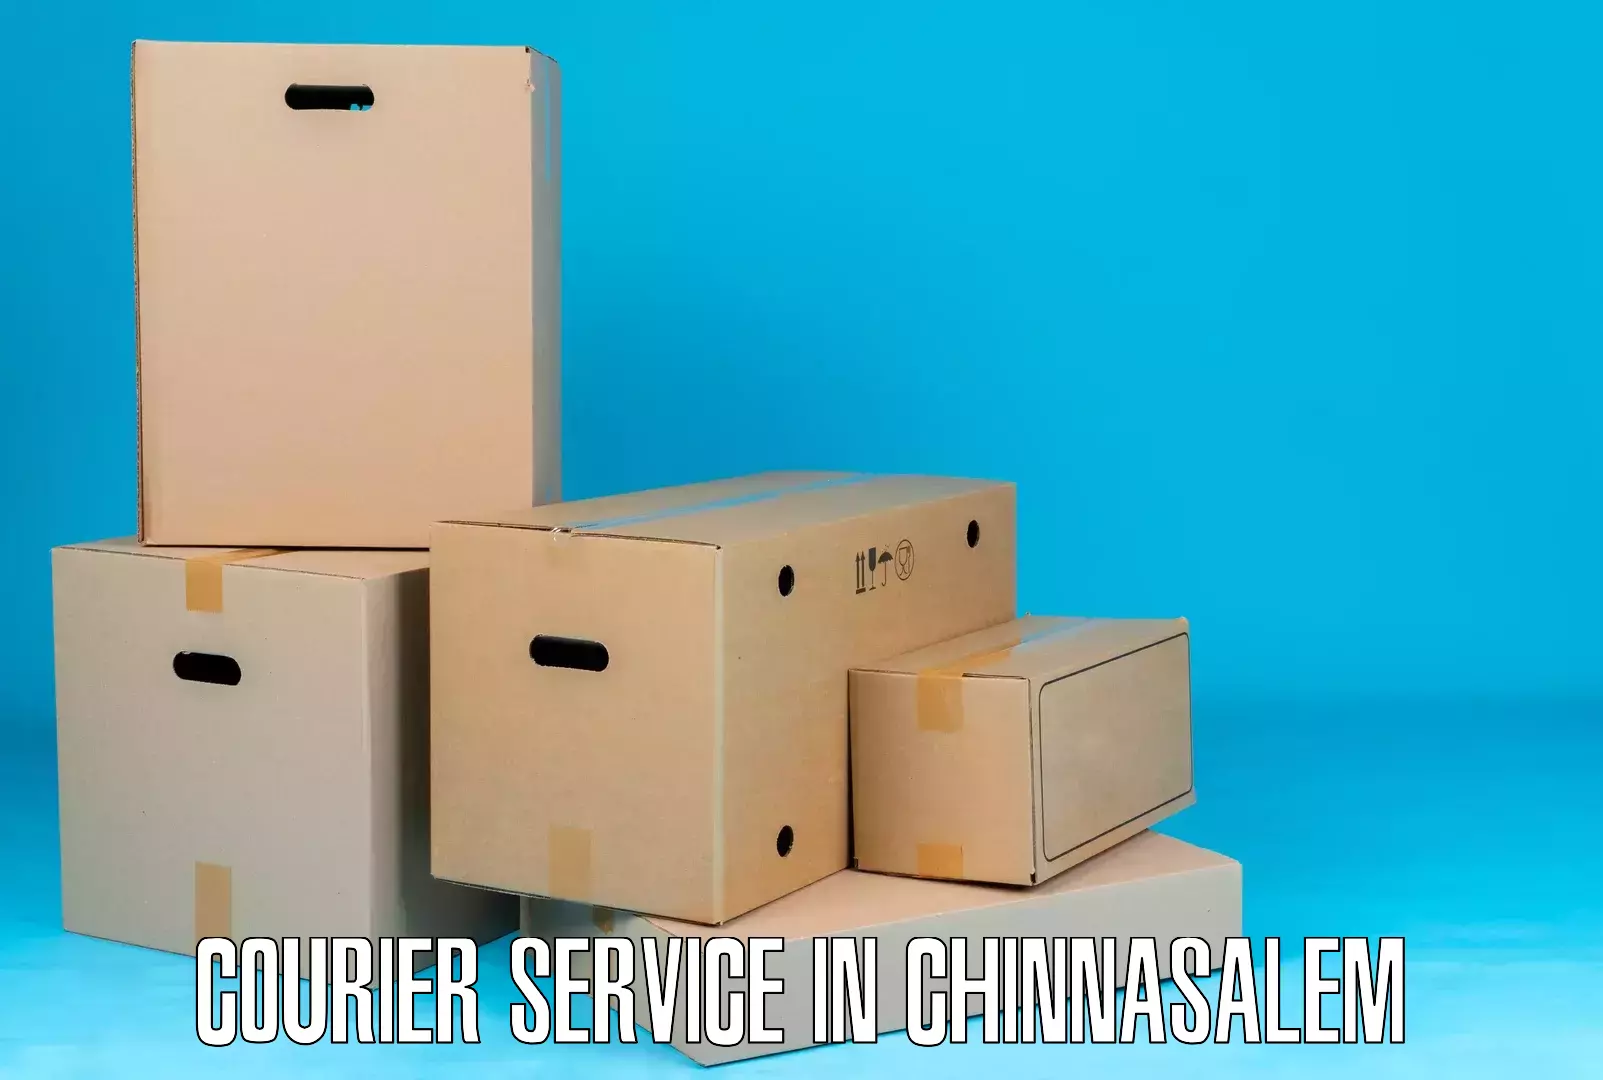 On-demand delivery in Chinnasalem